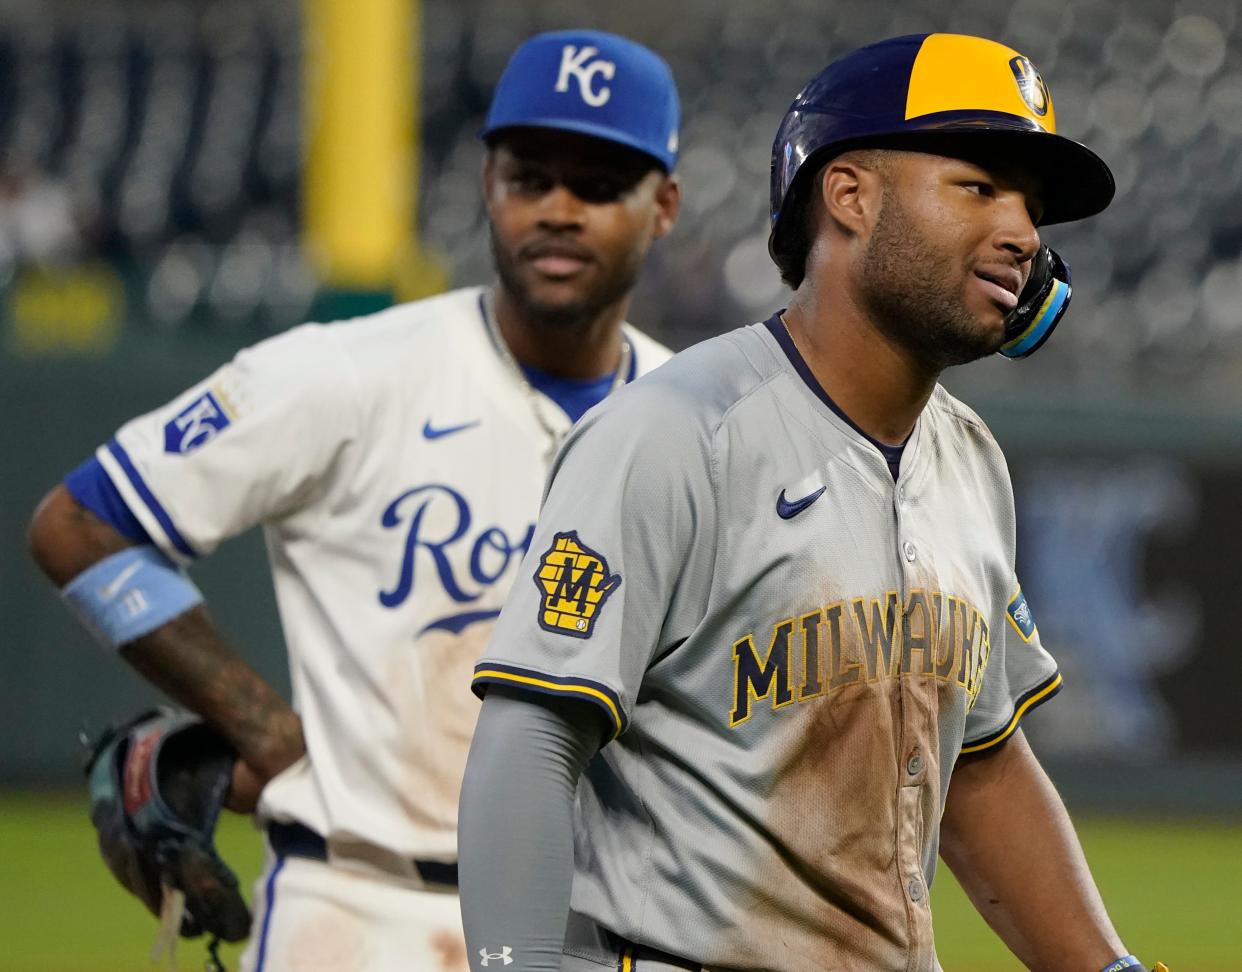 Jackson Chourio walks back to the Brewers dugout after being tagged out by the Royals' Maikel Garcia while trying to steal third in the eighth inning Monday night.